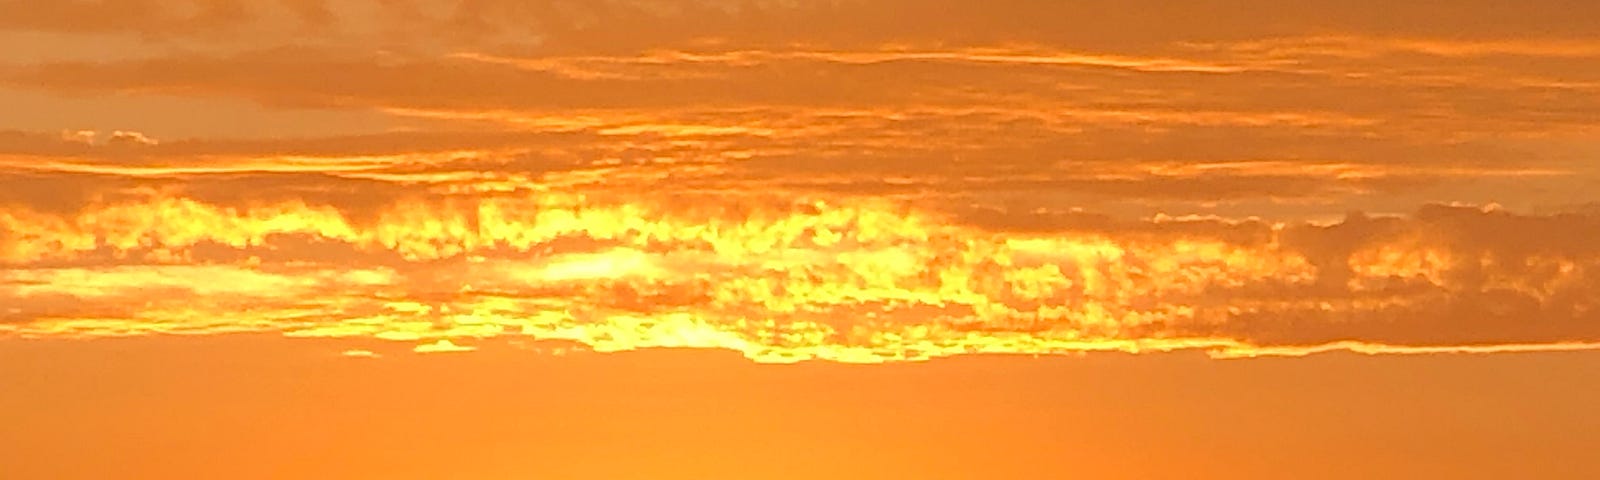 Orange sunset — the clouds look like a wave washing onto the shore